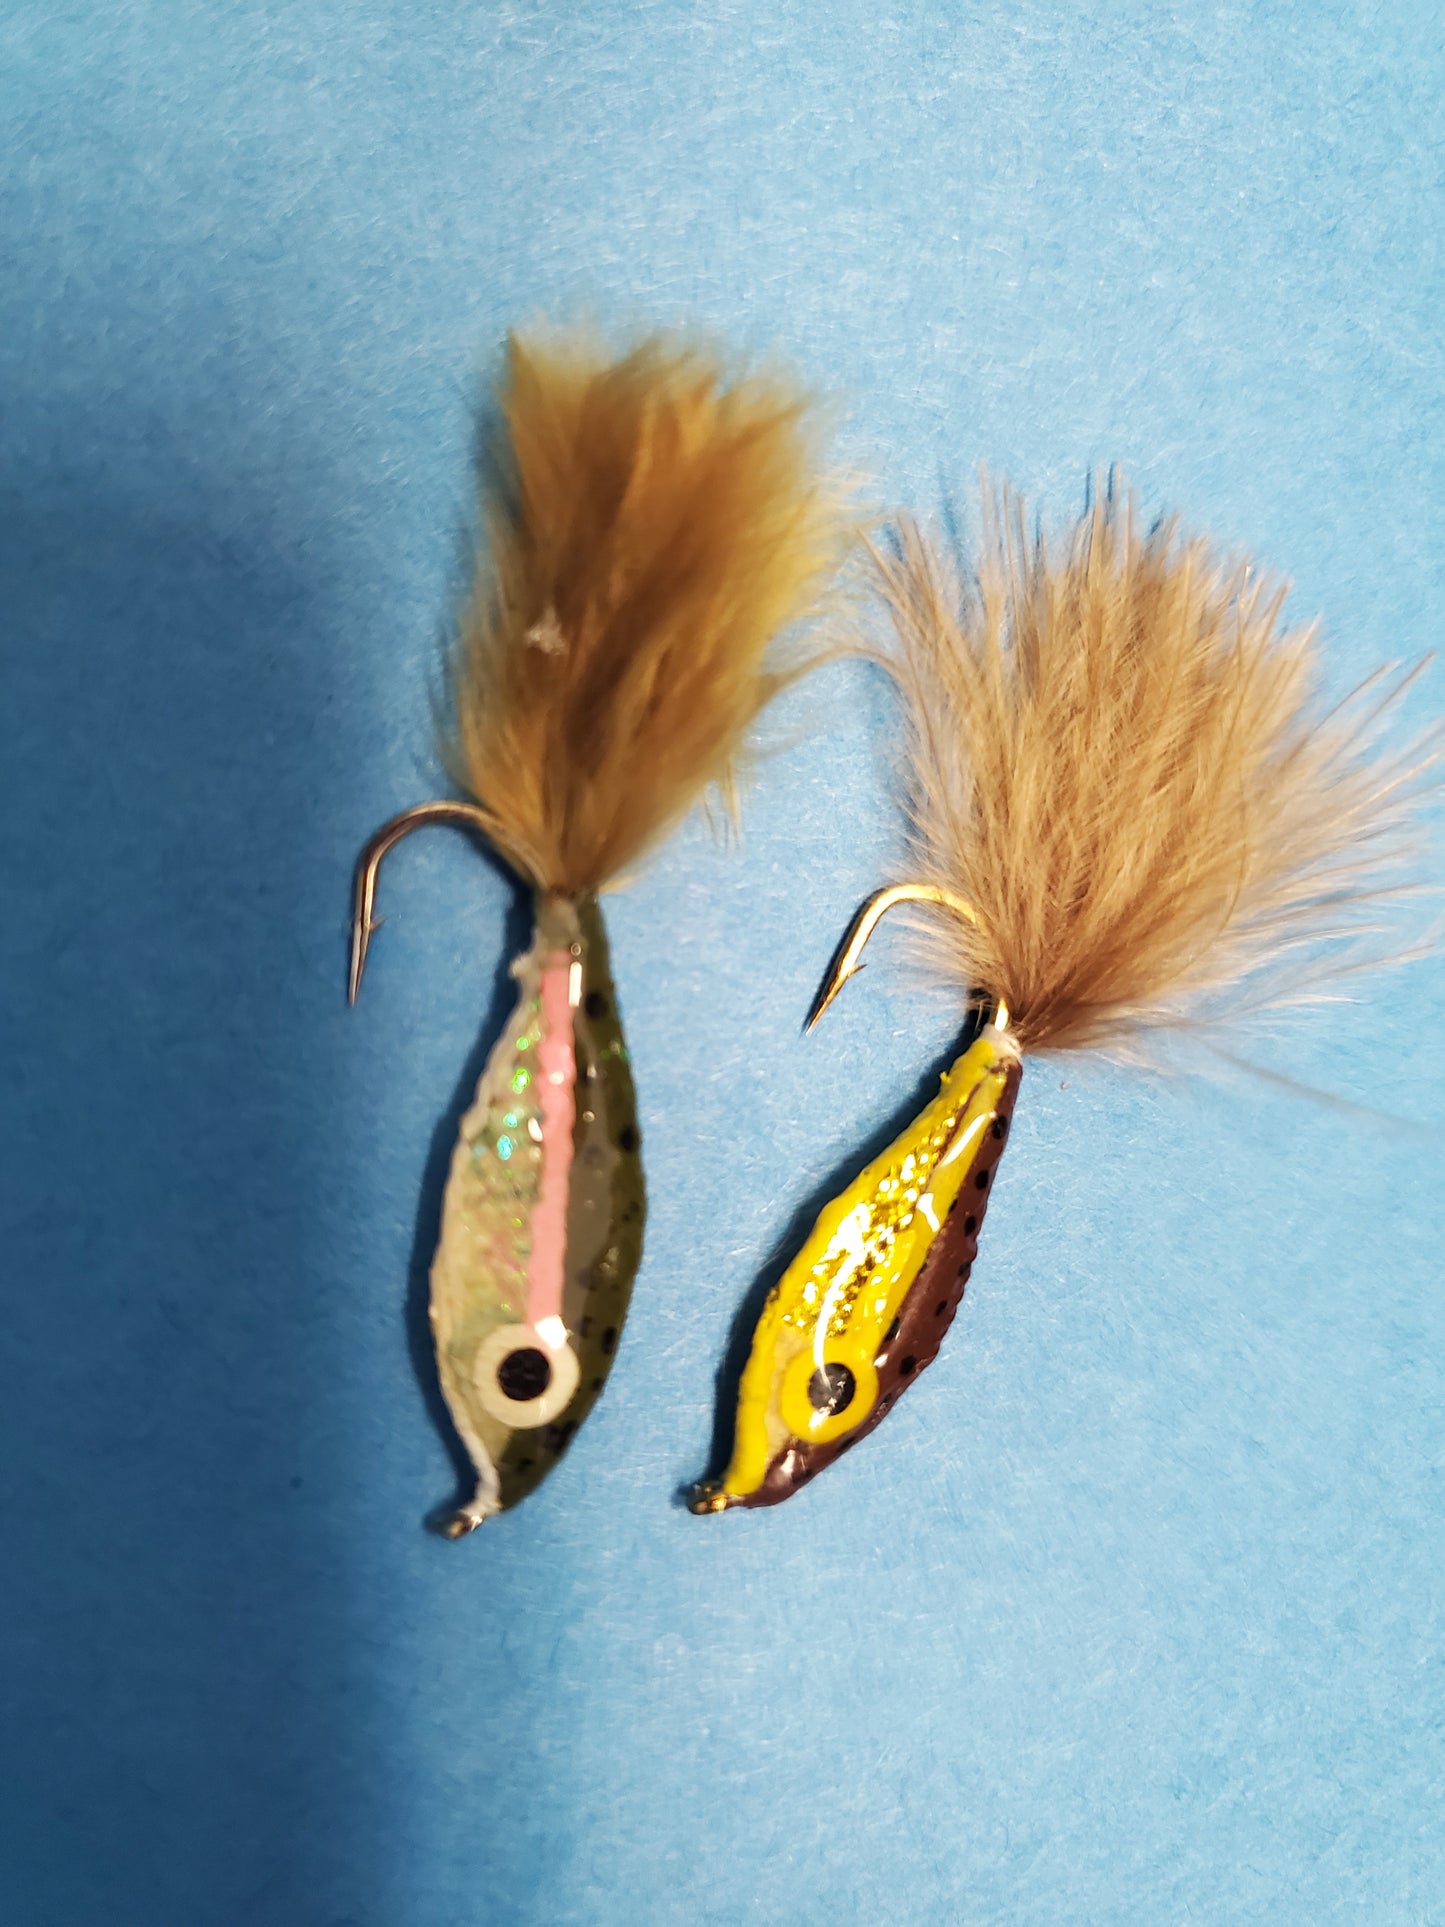 Baby Trout Streamer Fly Selection, Baby Trout Streamer, Trout Fry Streamer Fly